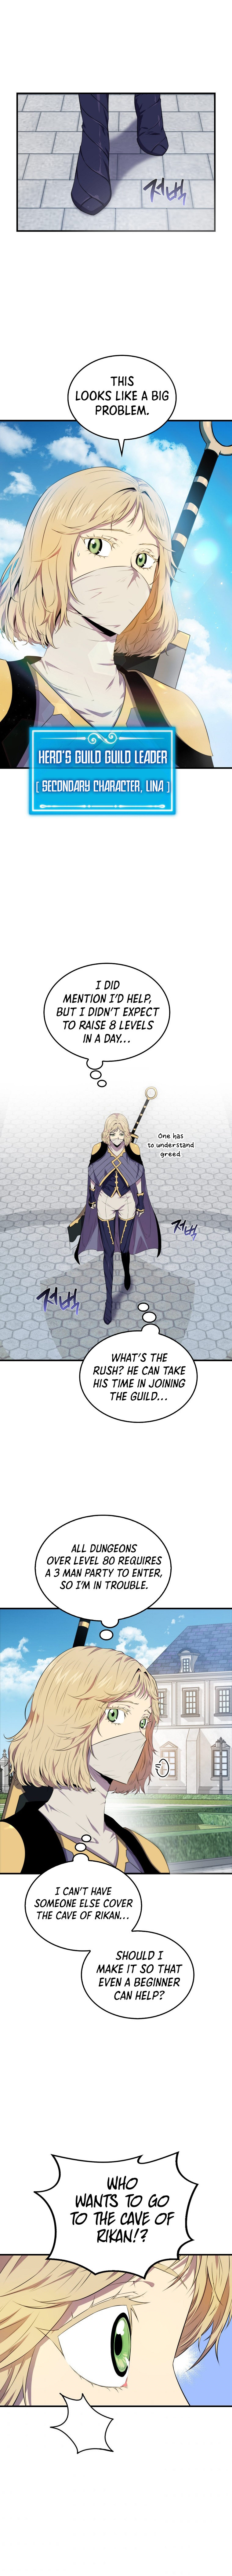 Sleeping Ranker - Chapter 14 Page 3